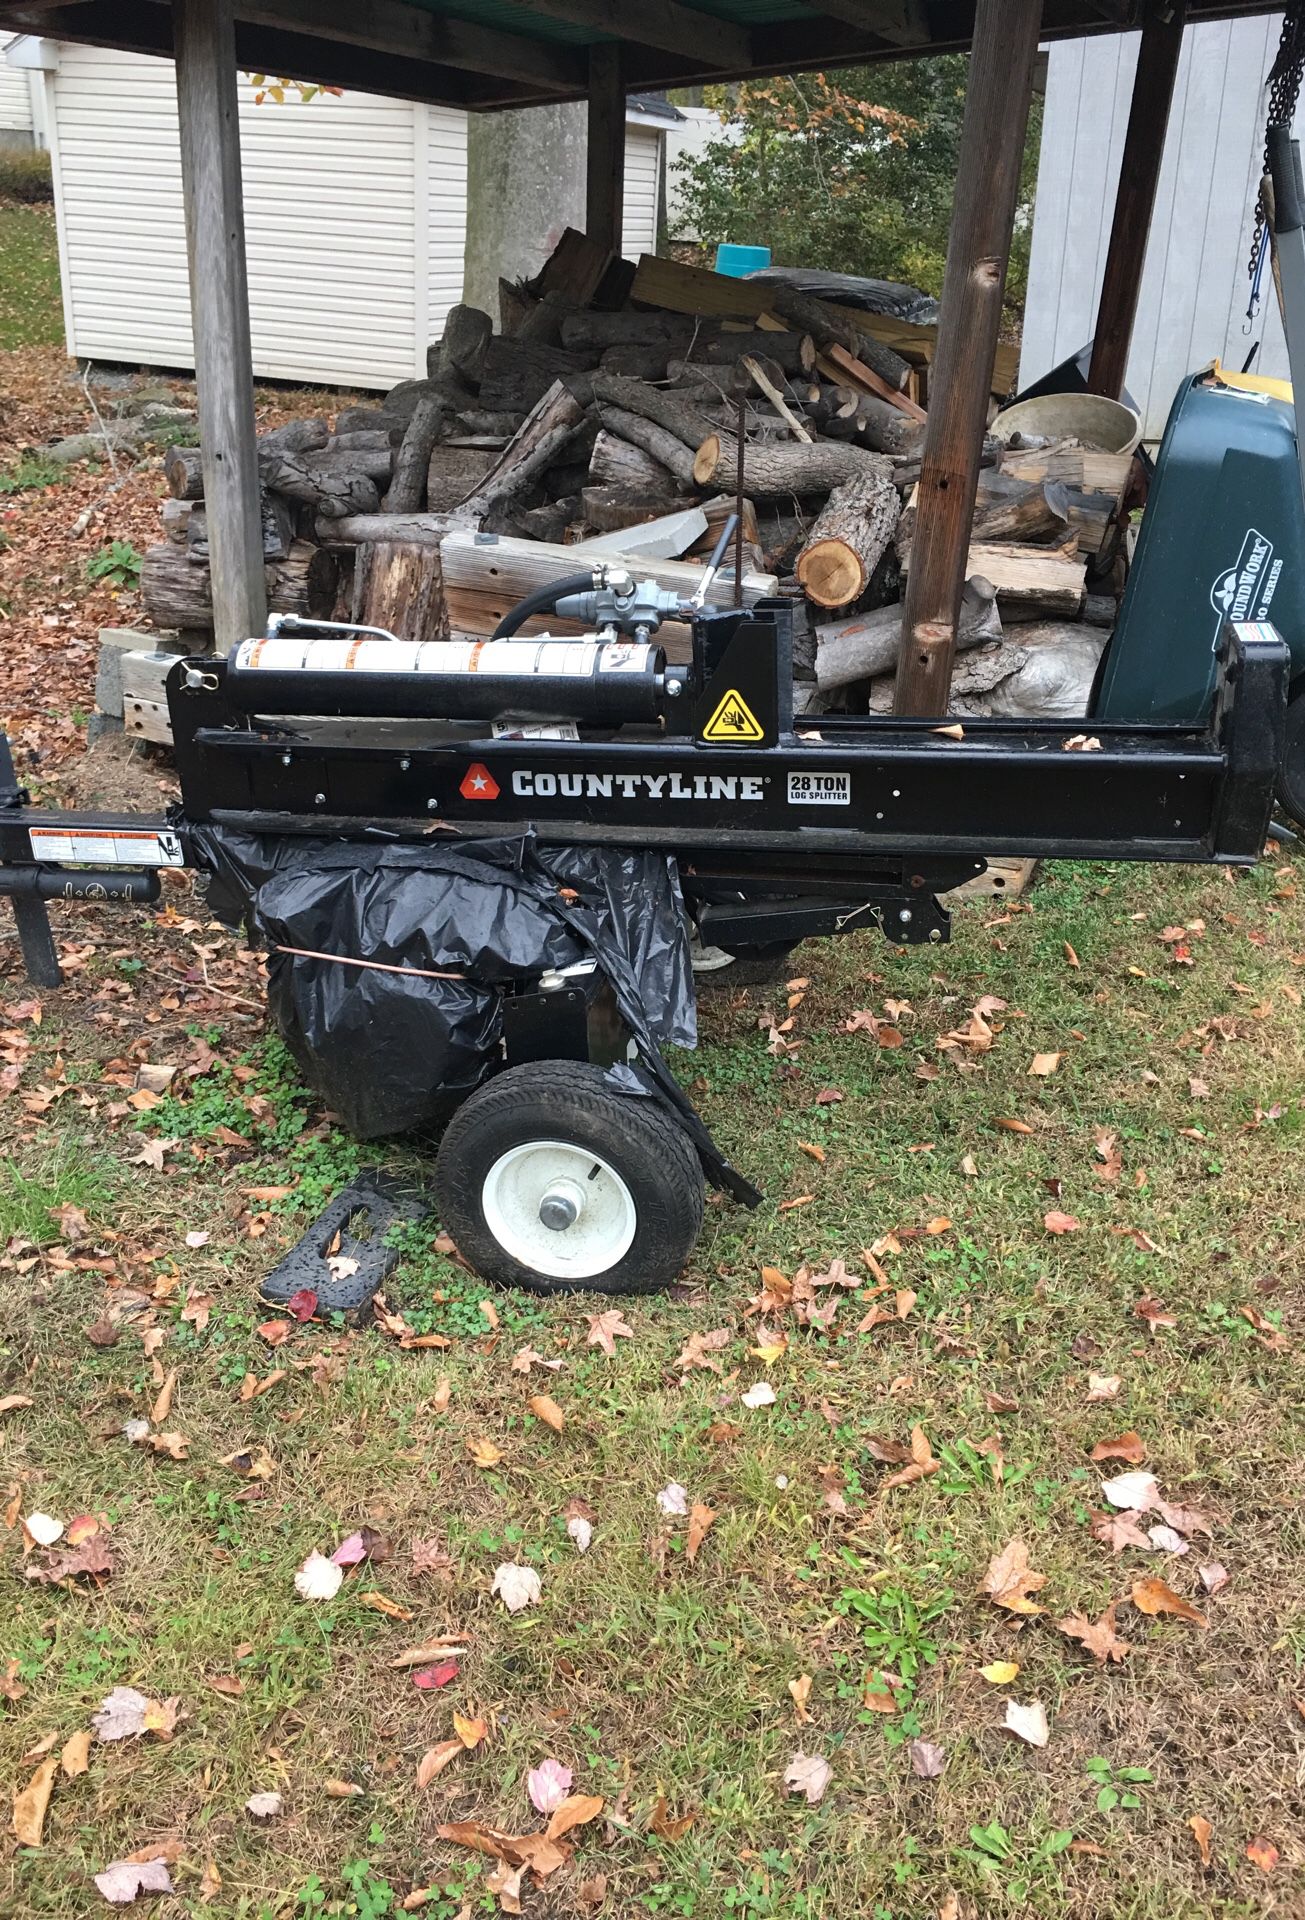 County line wood splitter 28ton. Used for only 2 hrs. Great condition. Like brand new!!!